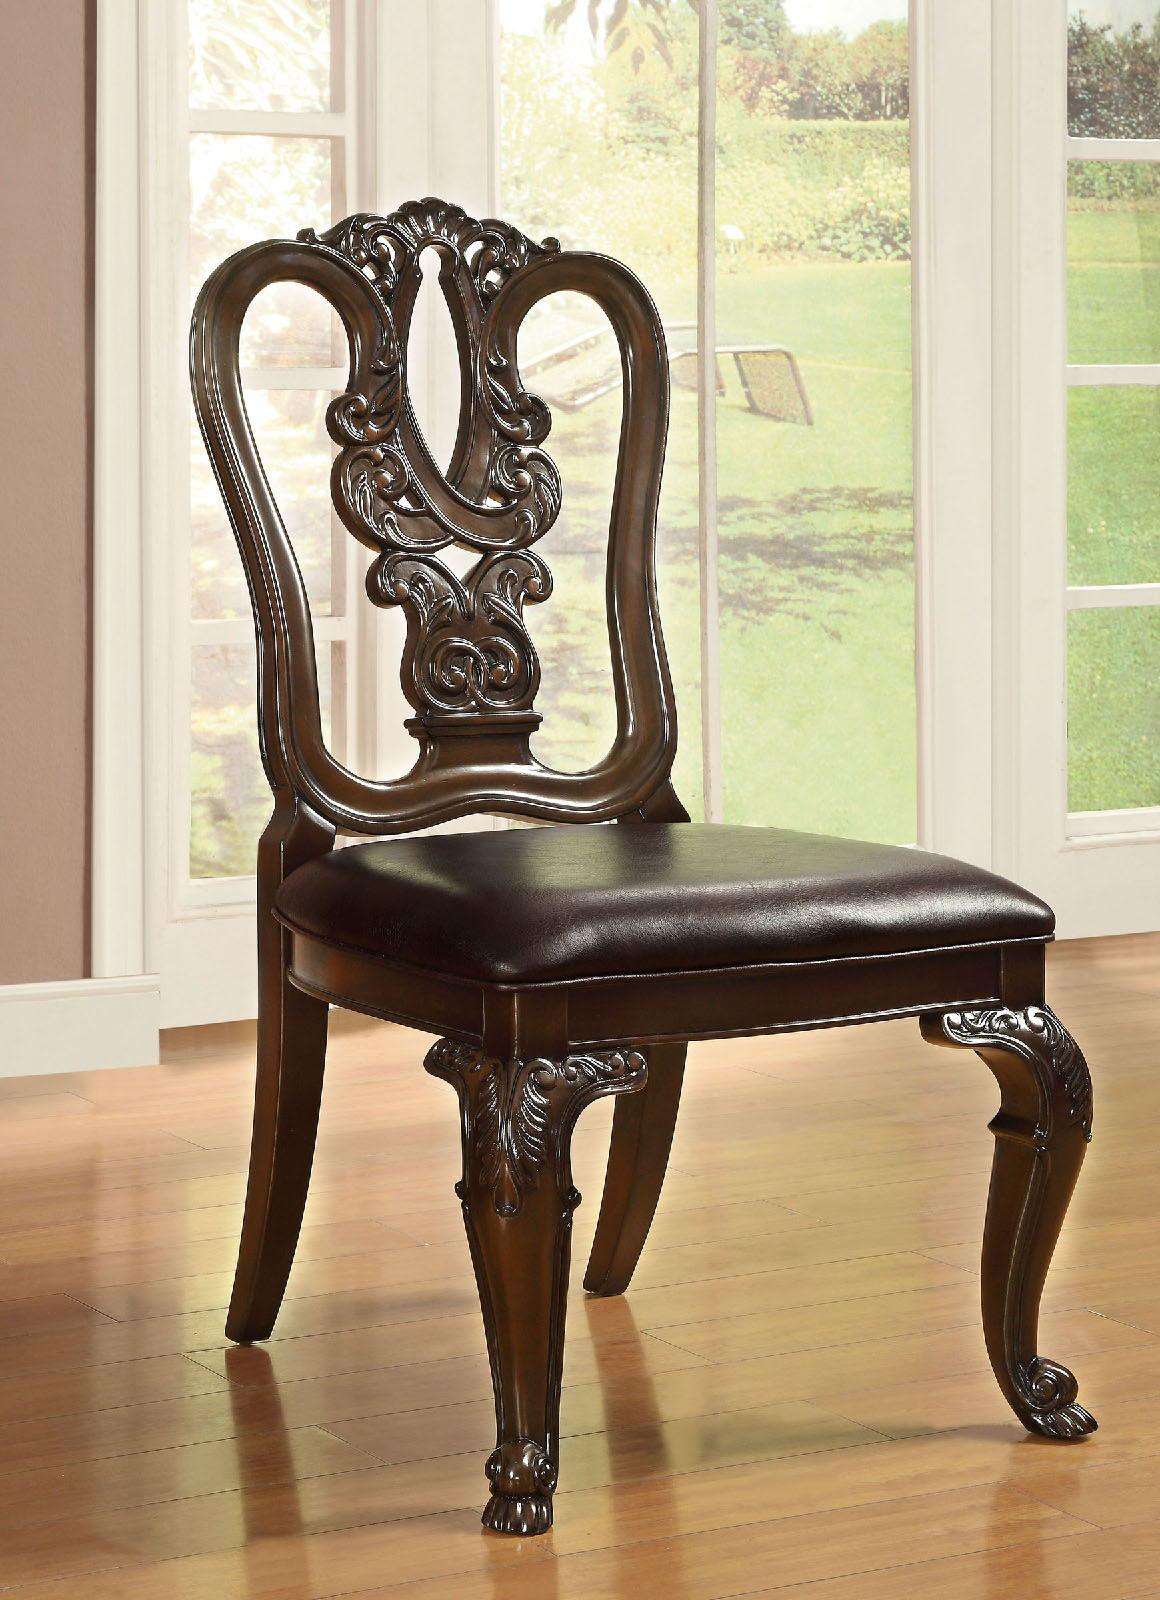 Furniture of America - Bellagio - Wooden Side Chair (Set of 2) - Brown Cherry / Brown - 5th Avenue Furniture